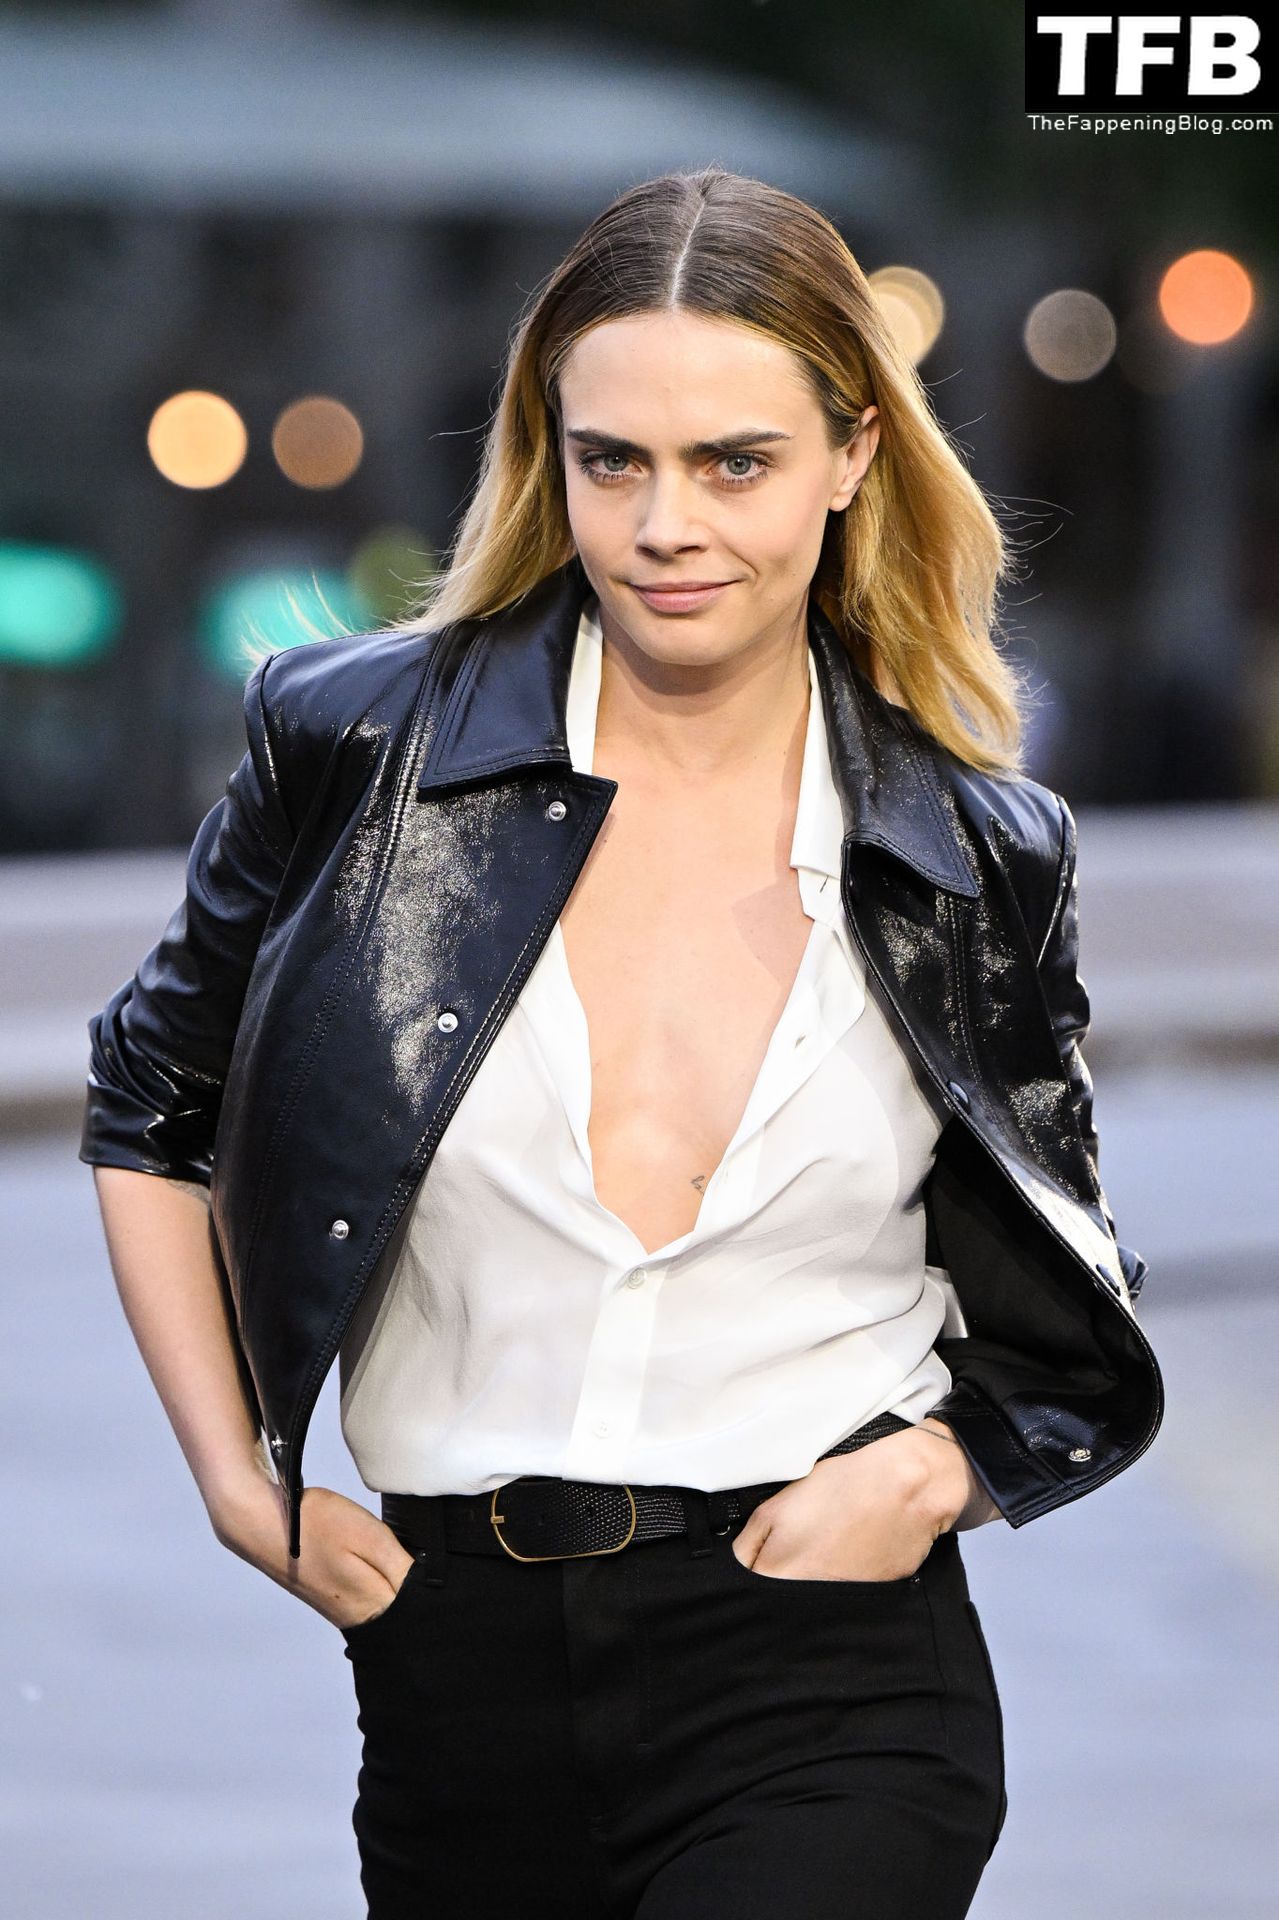 Cara-Delevingne-Sexy-The-Fappening-Blog-10.jpg